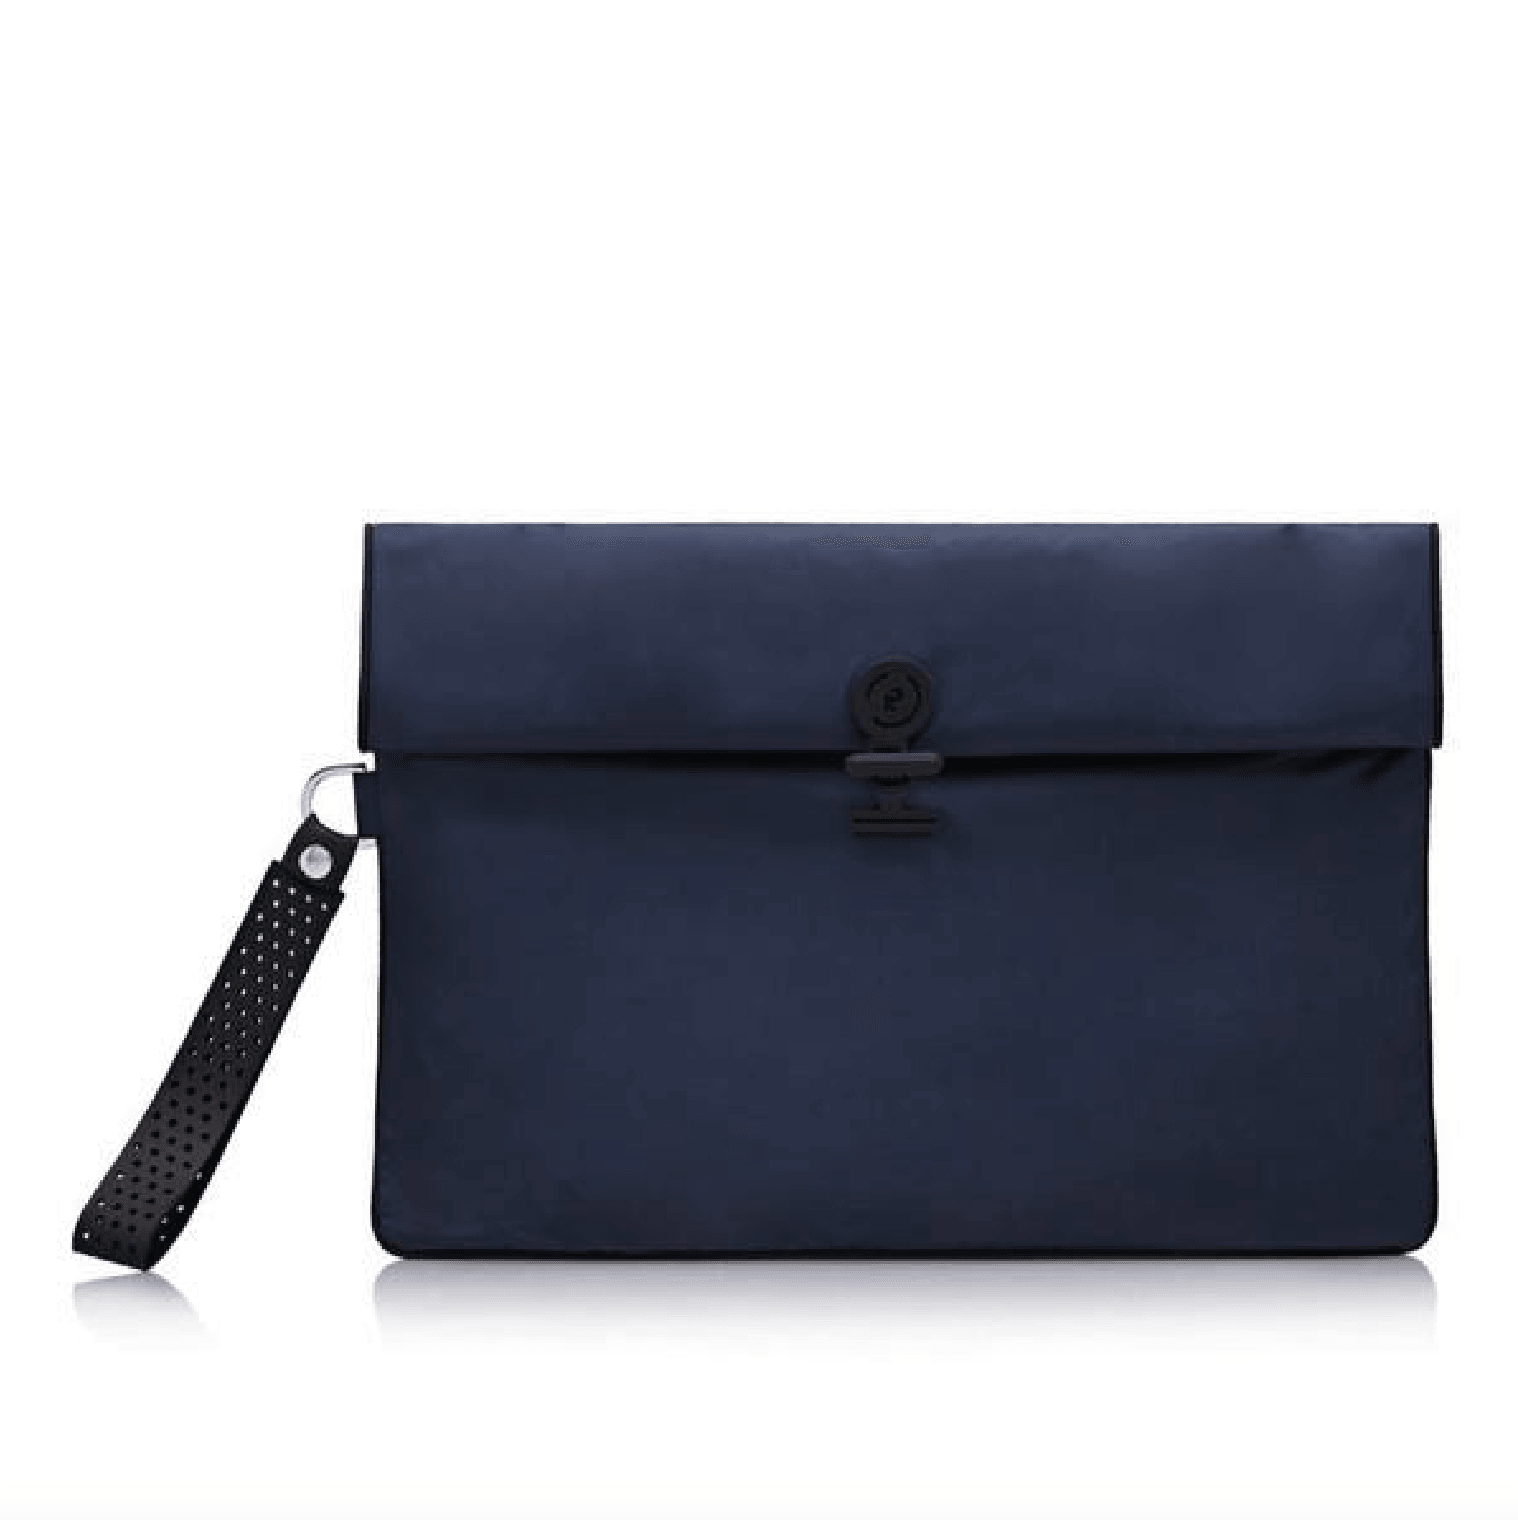 Maxi Wet Bag in Midnight Ink colourway, folded closed